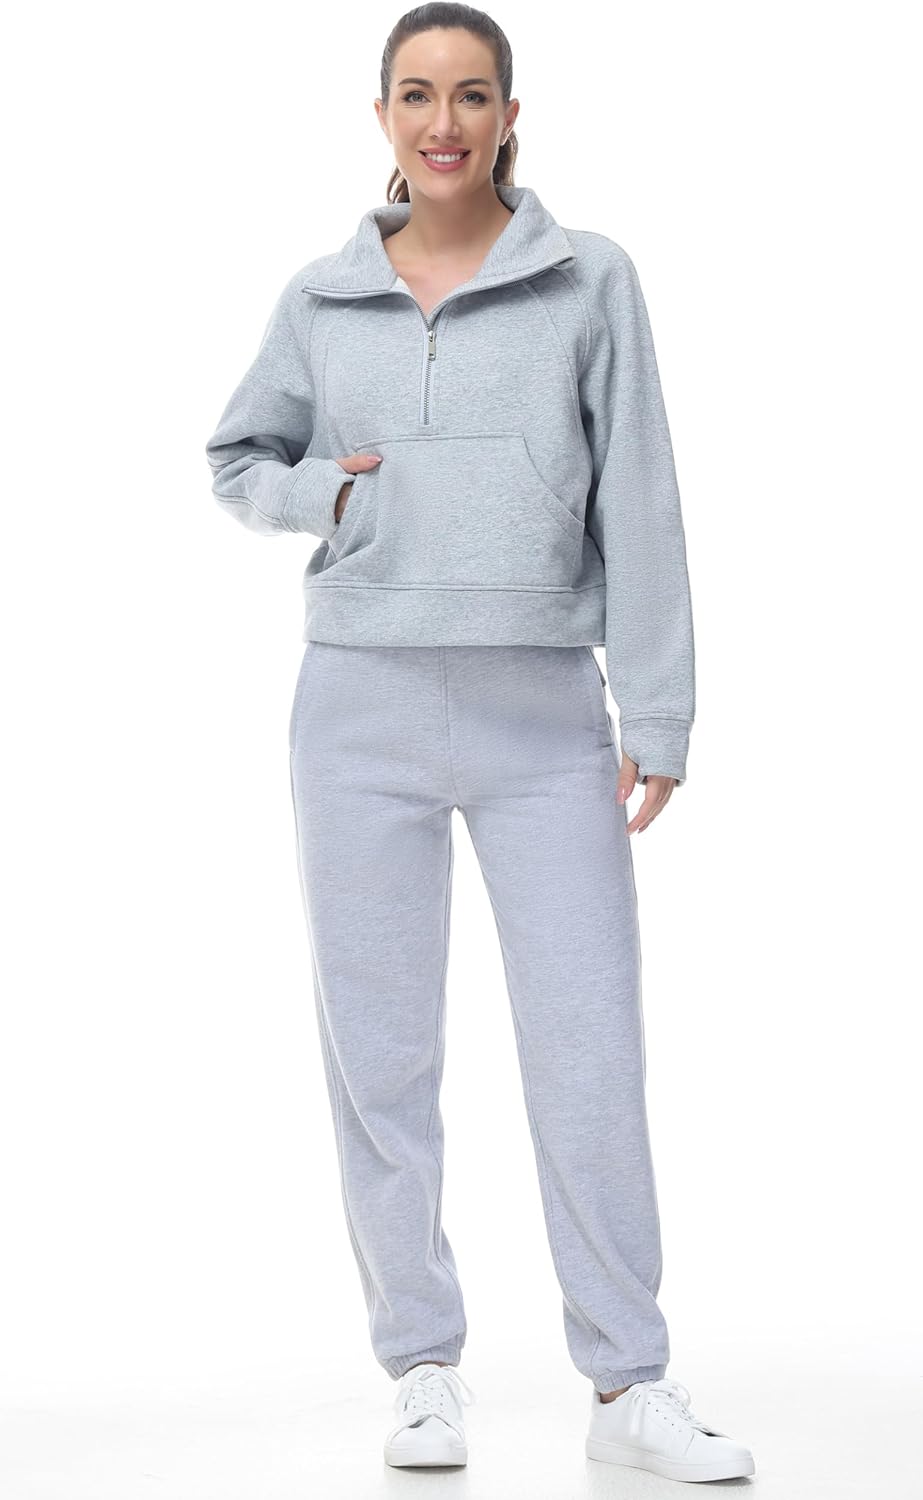 https://www.allthegympeople.com/wp-content/uploads/sites/128/2023/12/THE-GYM-PEOPLE-Womens-Fleece-Sweatpants-Warm-Workout-Joggers-Pants-with-Pockets-Grey-28121-2.jpg